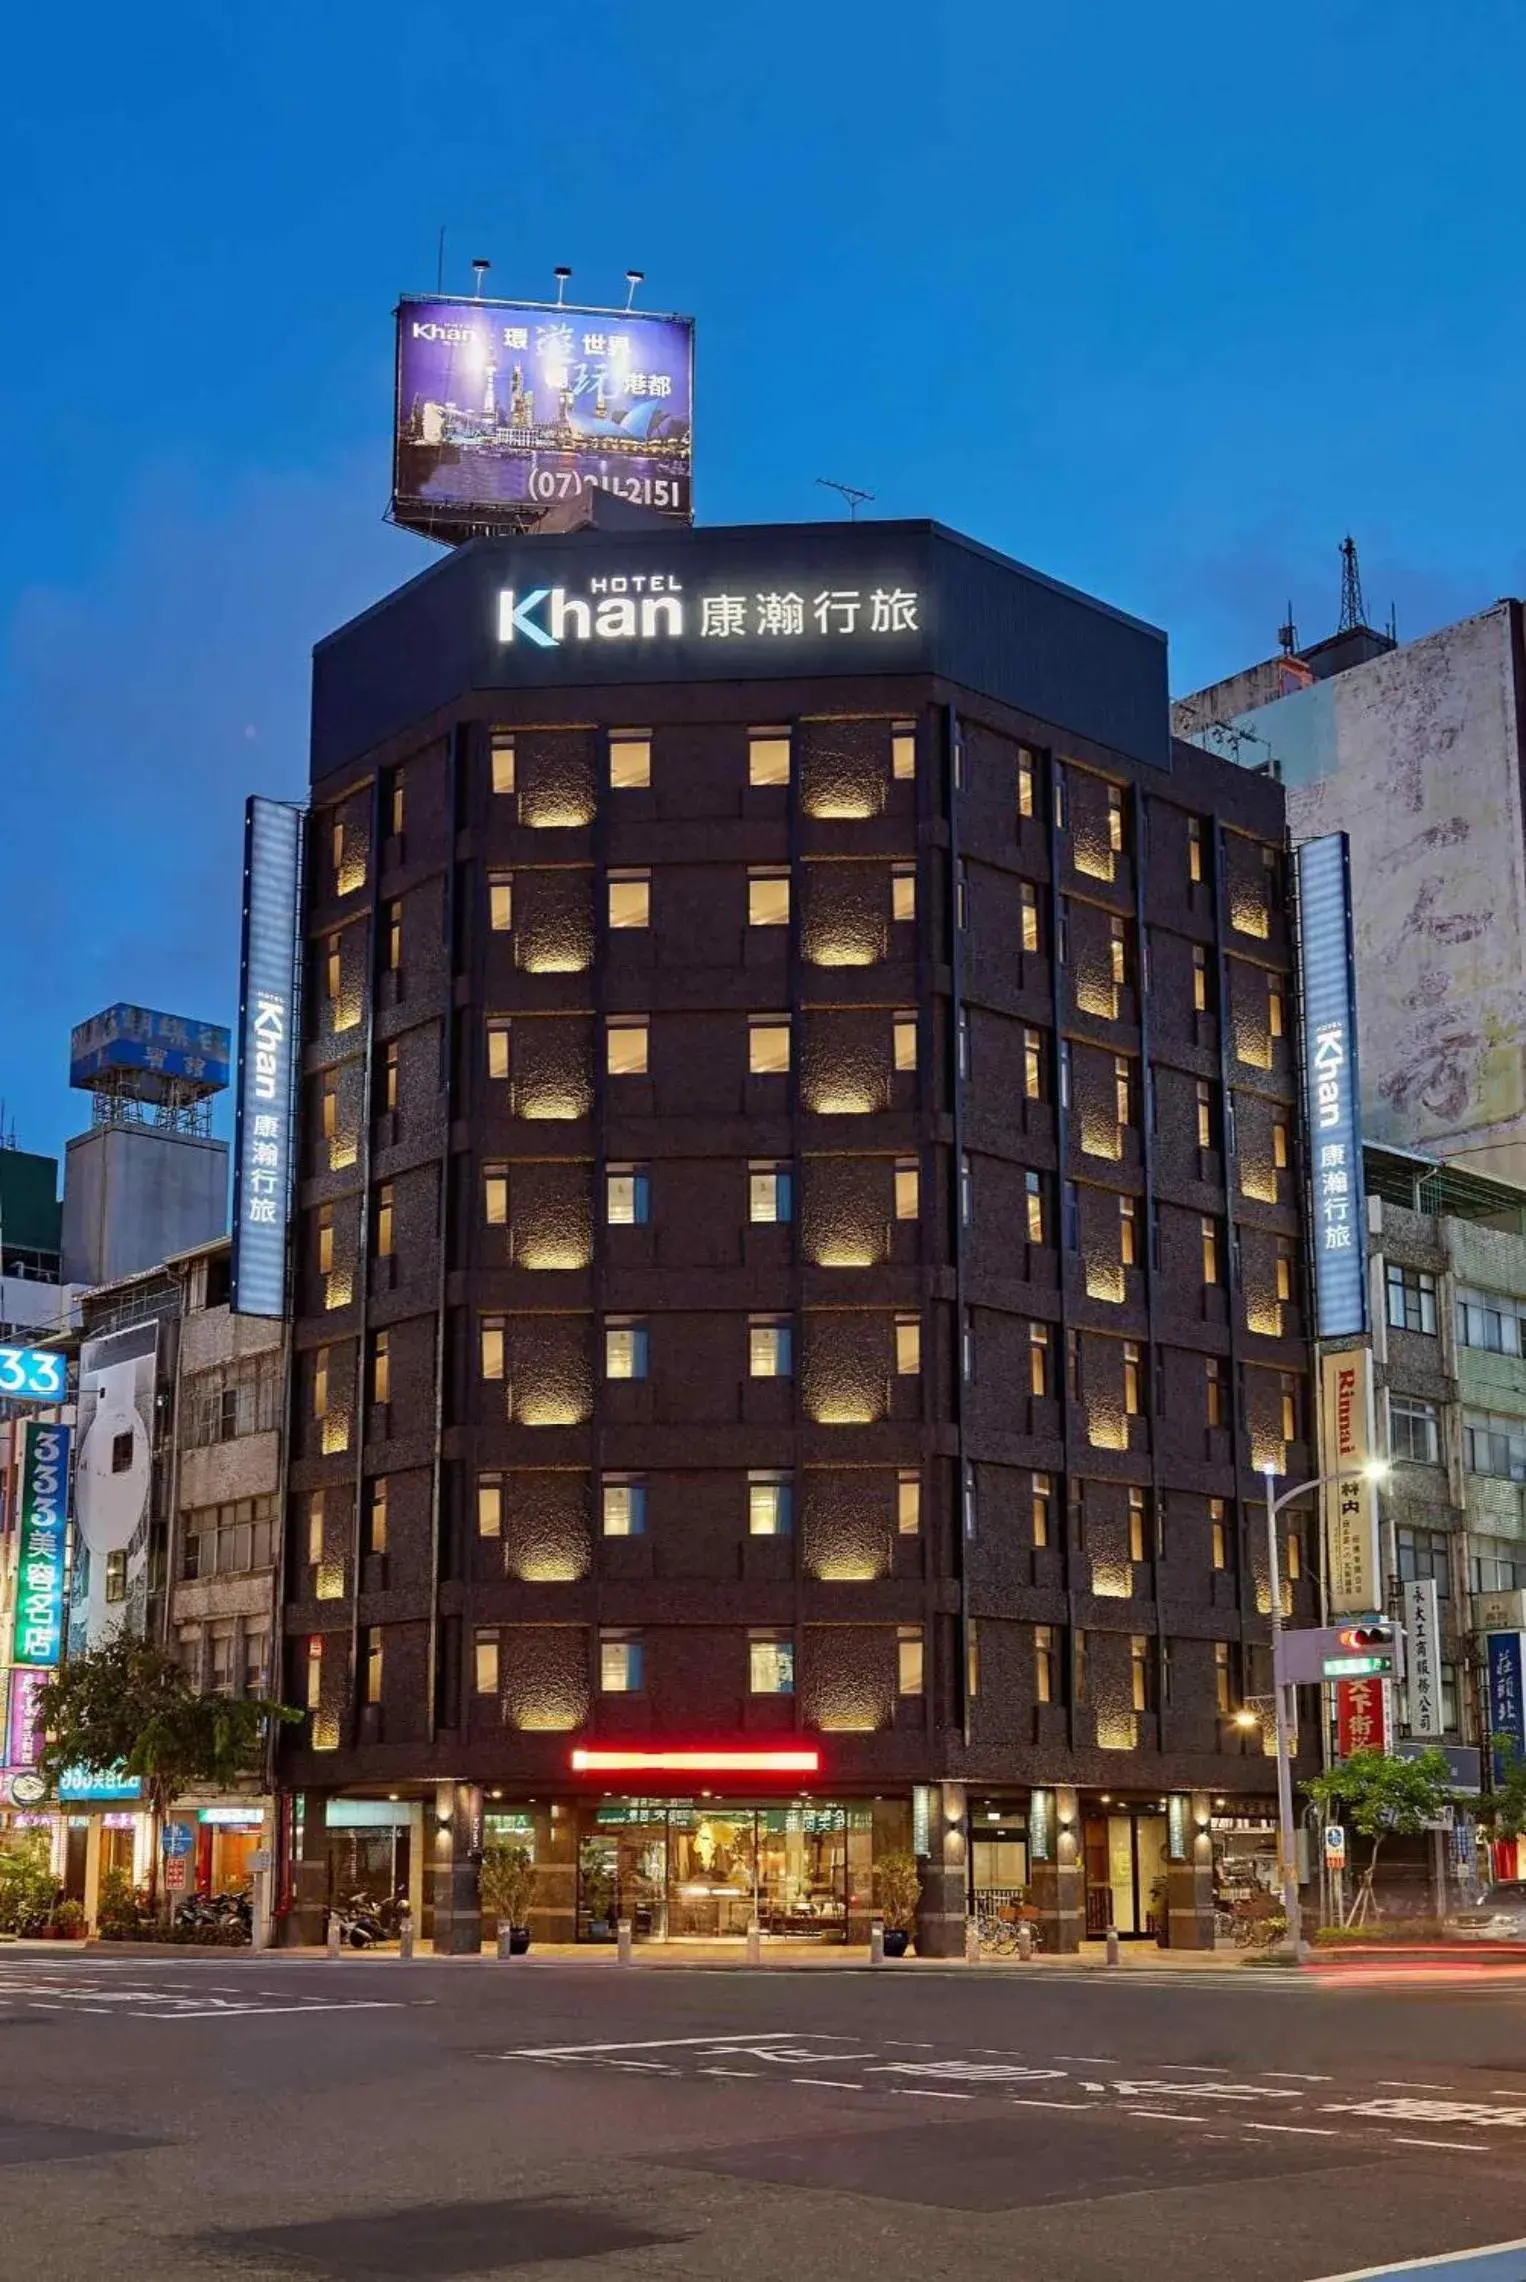 Property Building in Khan Hotel